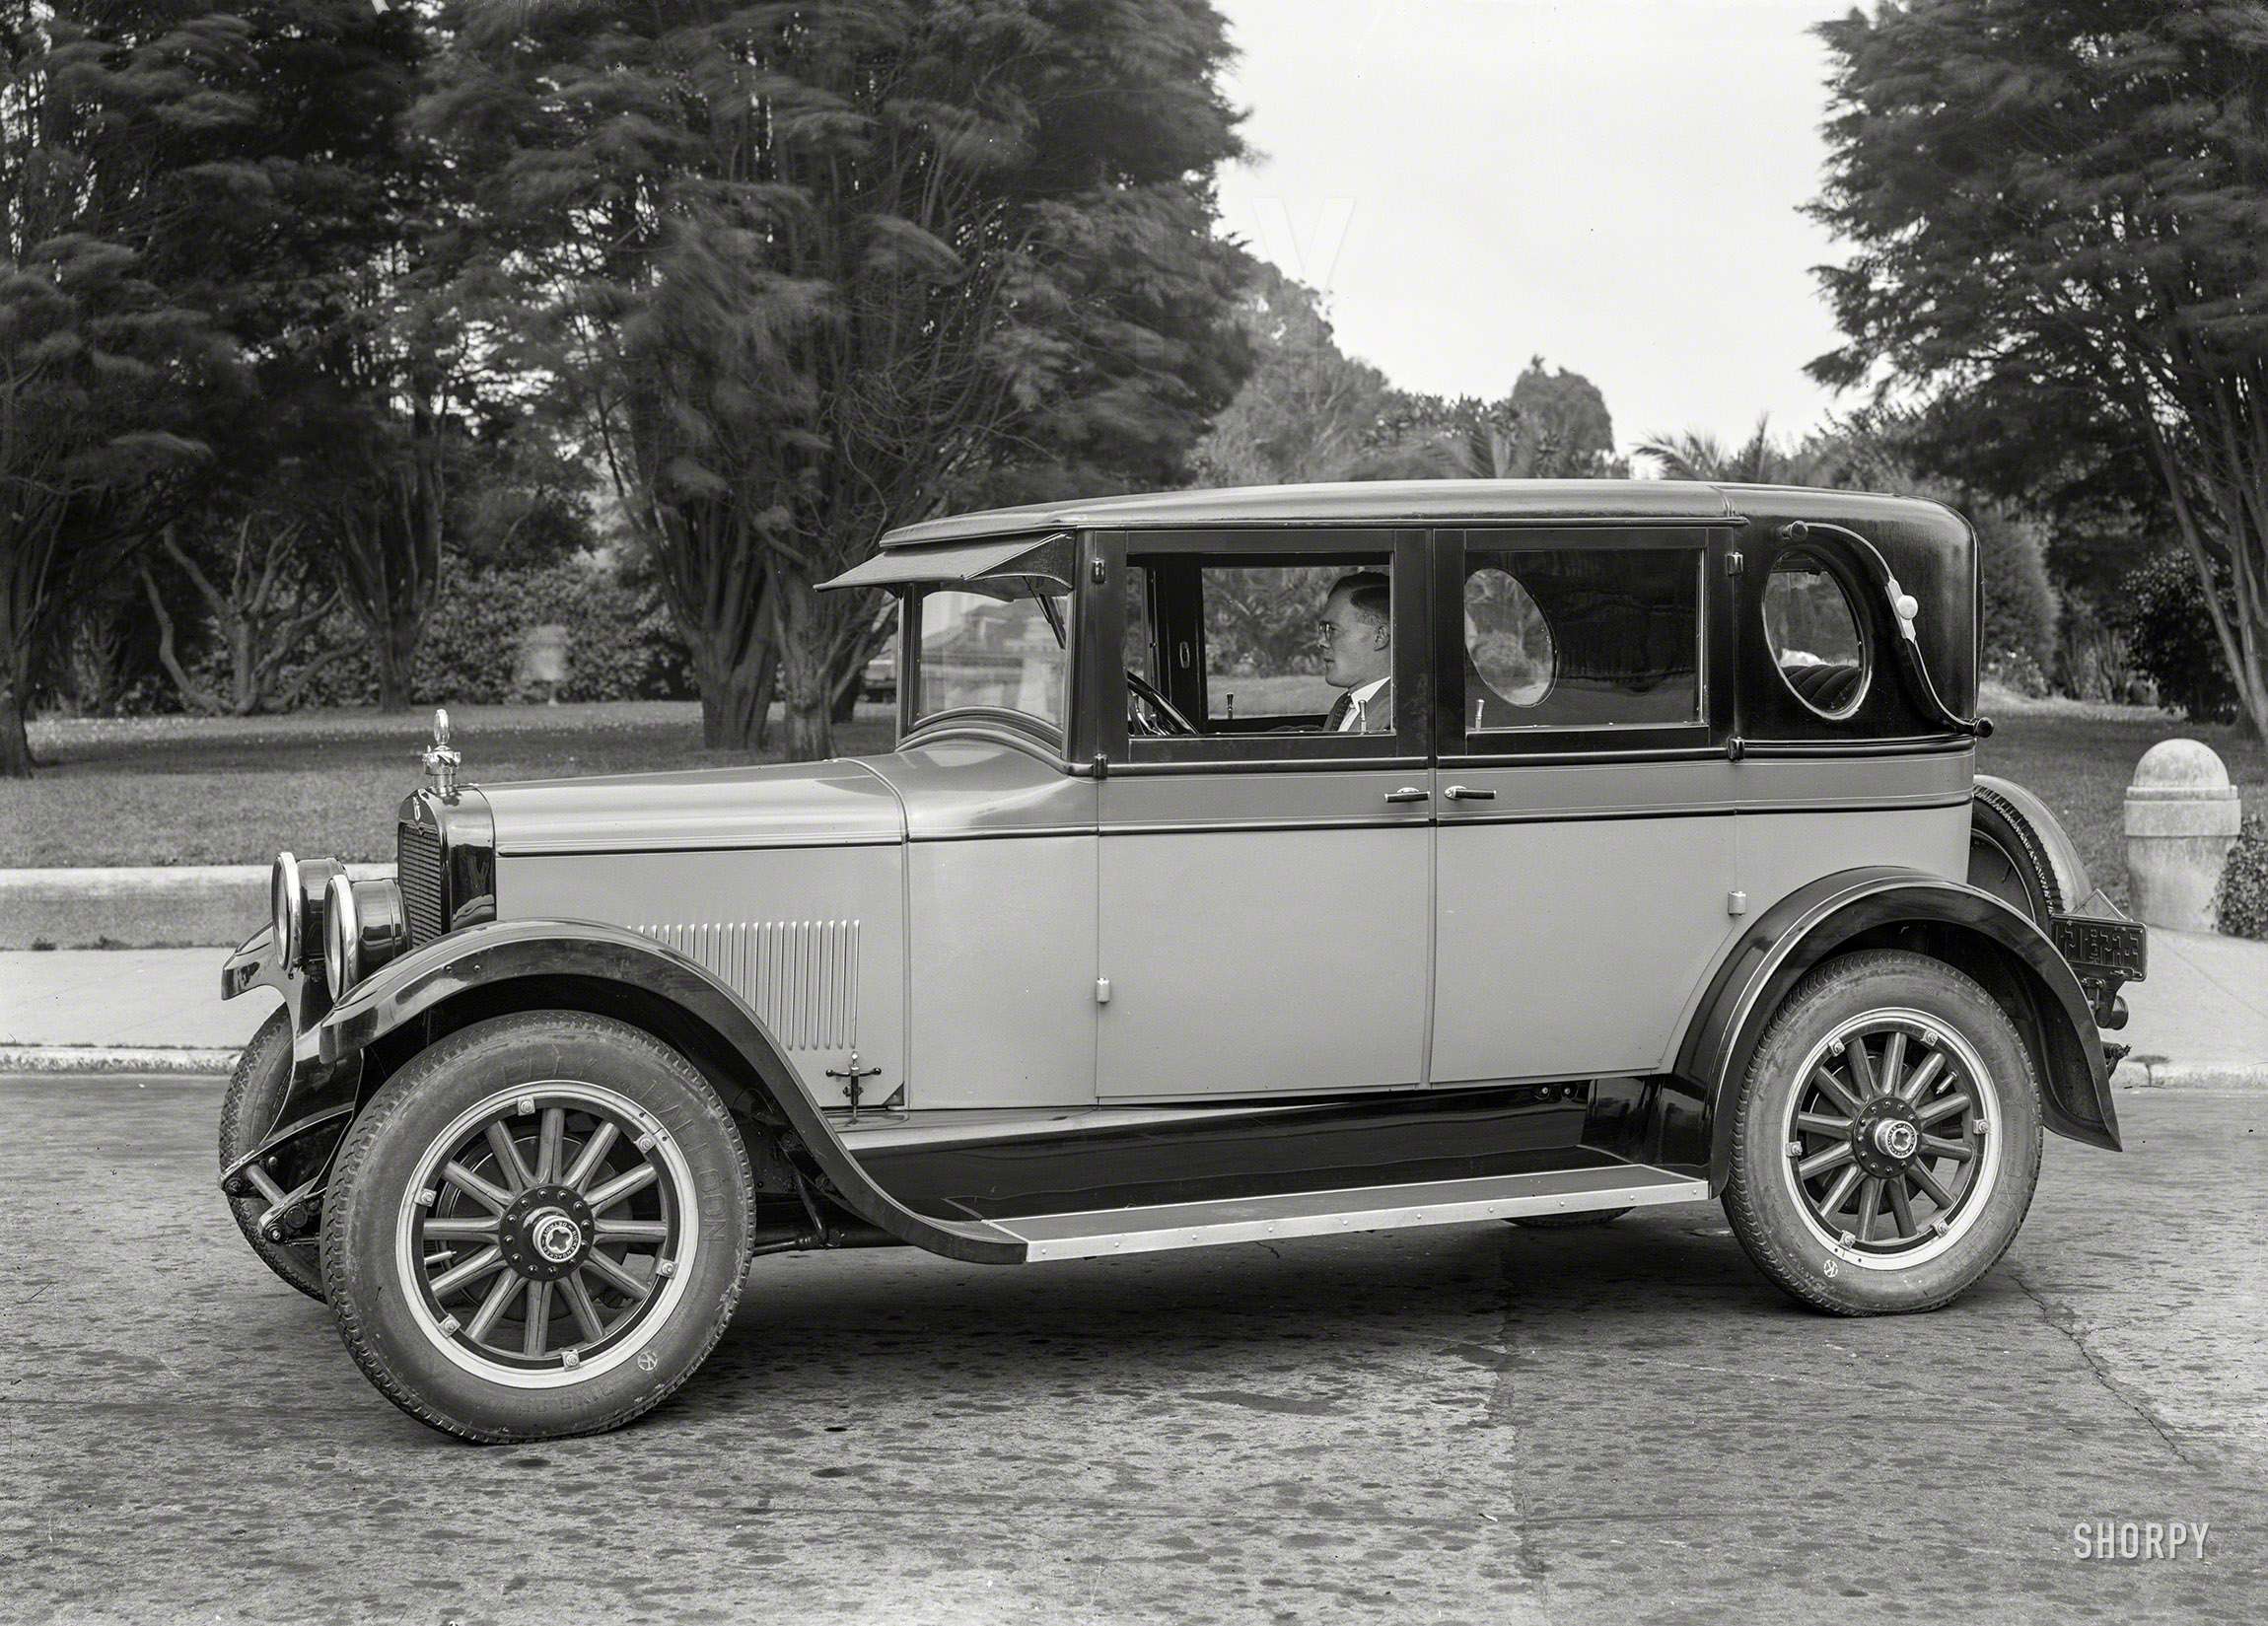 San Francisco, 1925. "Rickenbacker D-6 Coach-Brougham at Lafayette Park." Now twirling on the turntable in the Shorpy Showroom of Automotive Anachronisms. 5x7 inch glass negative by Christopher Helin. View full size.